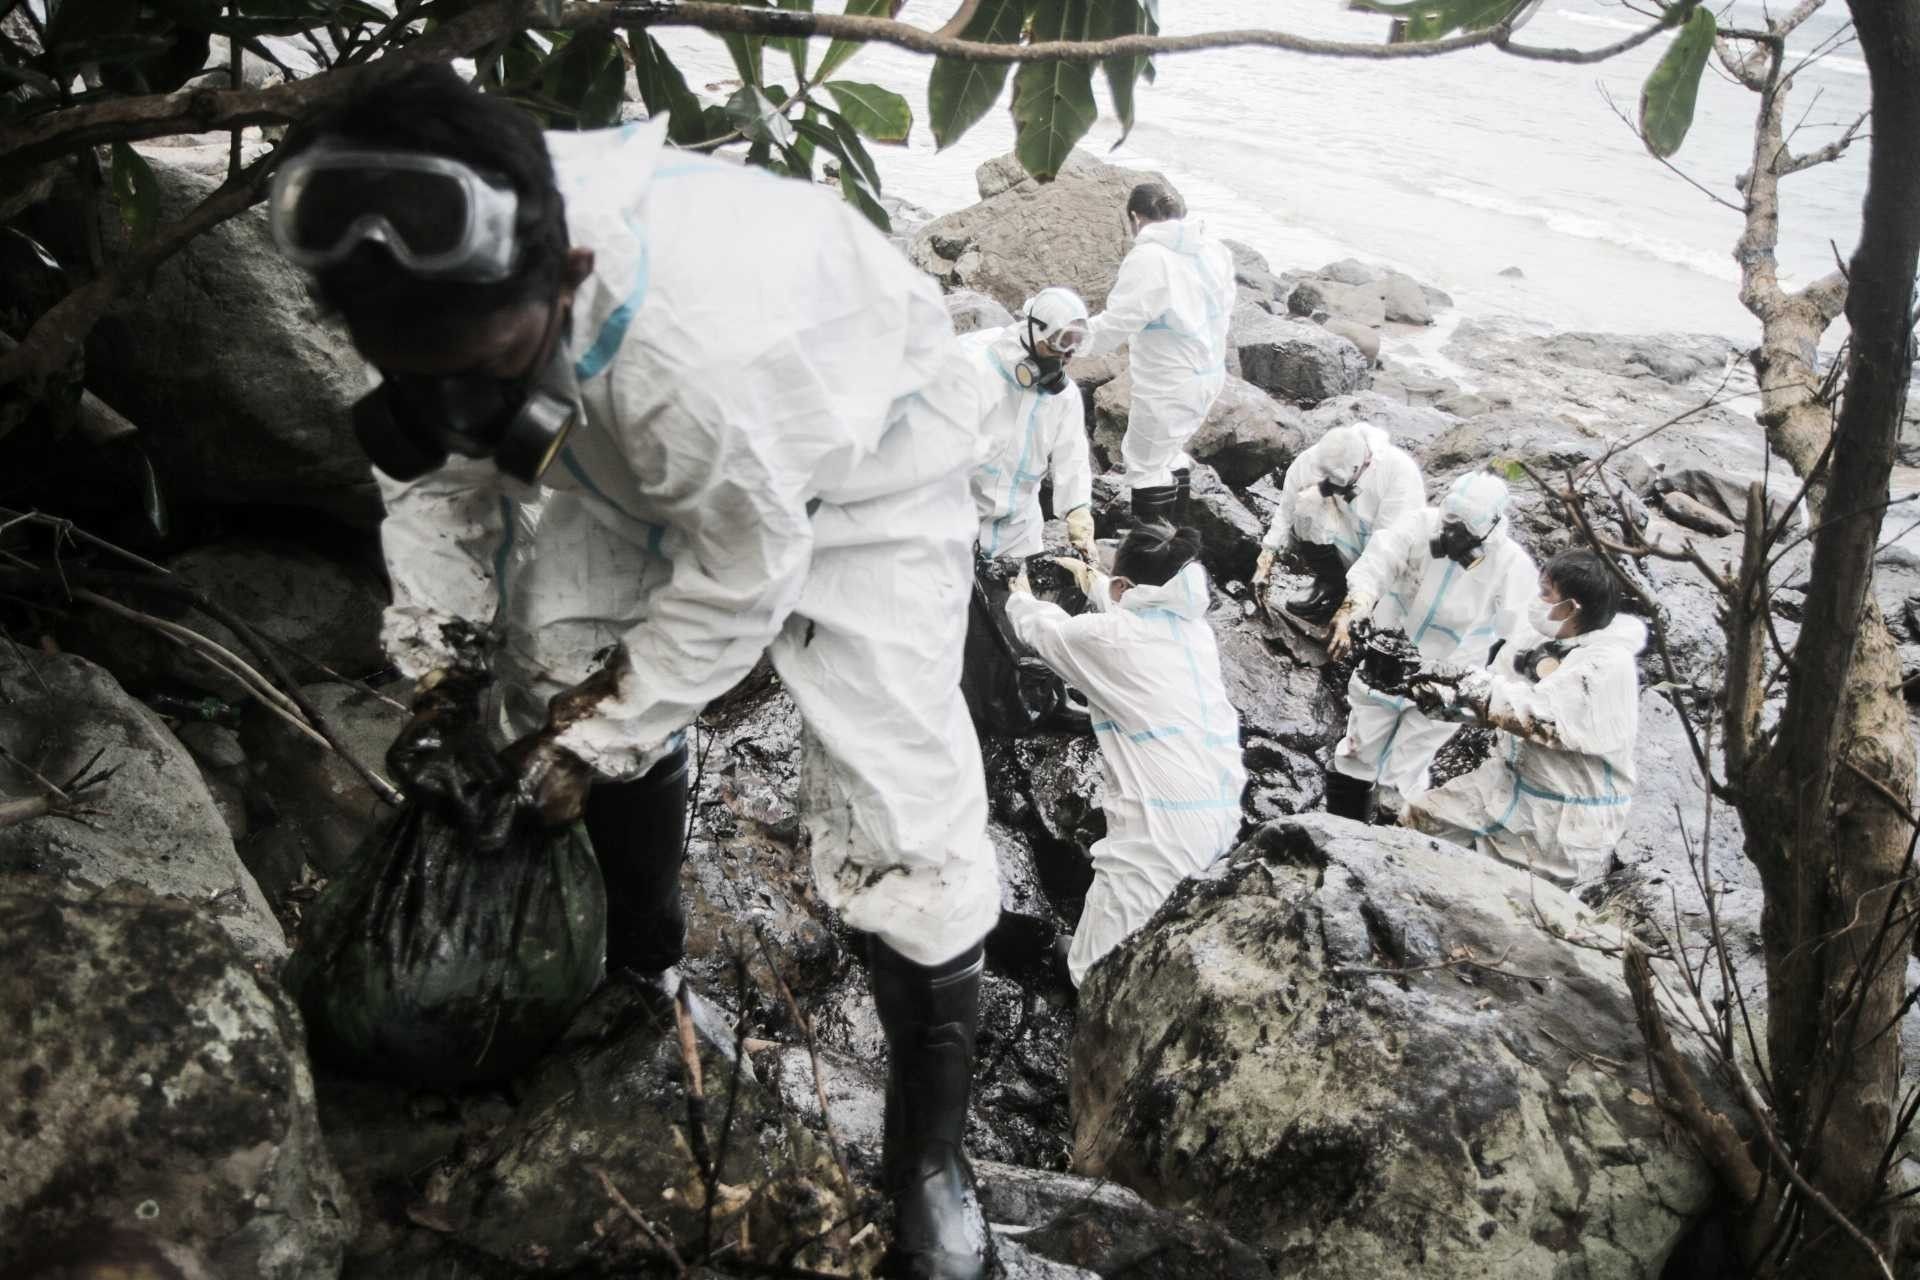 Lawyers, environmentalists demand transparency from gov't, firms behind oil spill